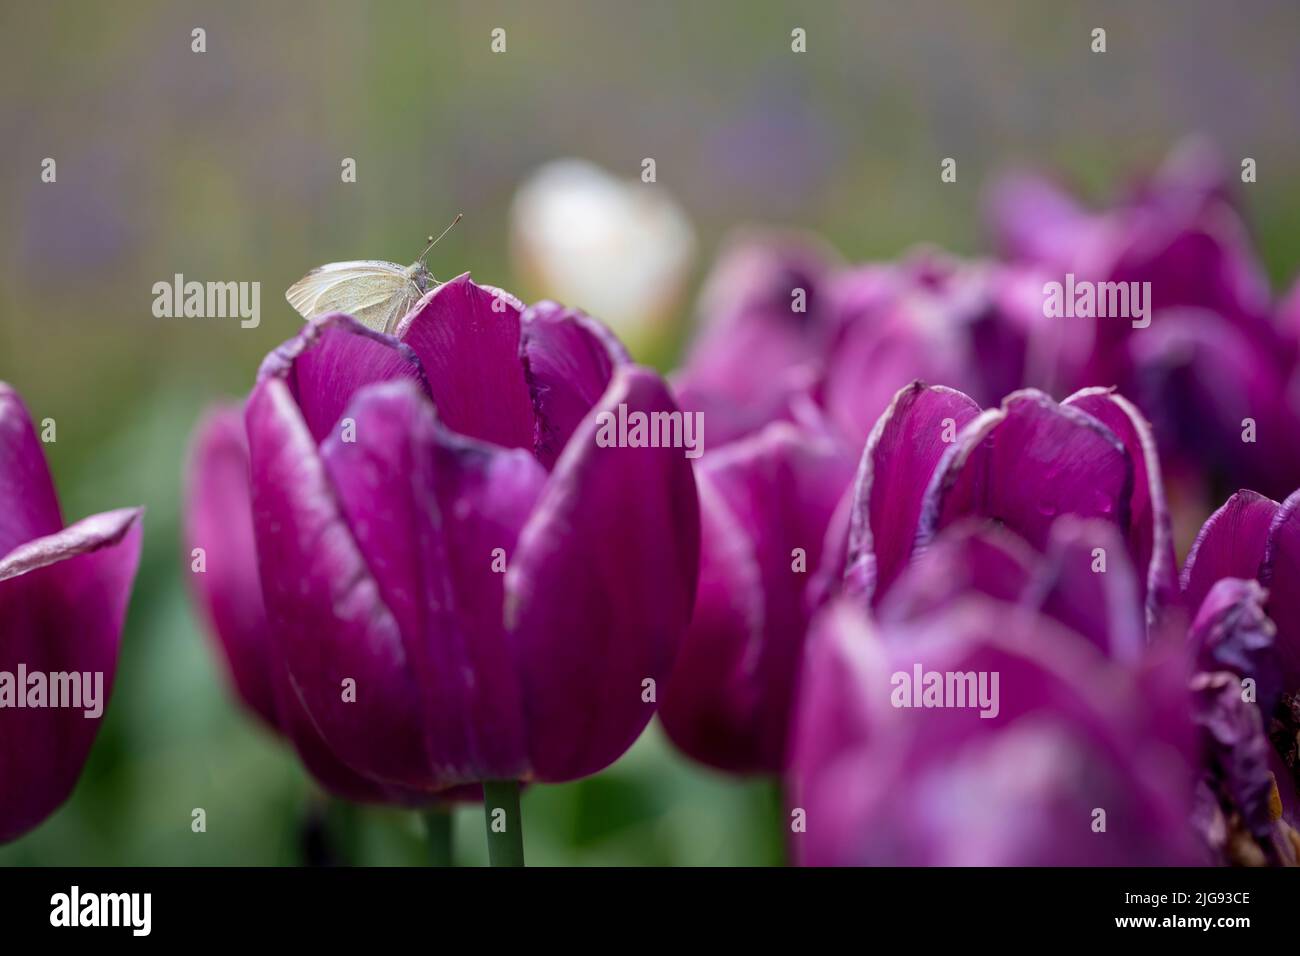 tulips in pastel coral tints at blurry background Stock Photo